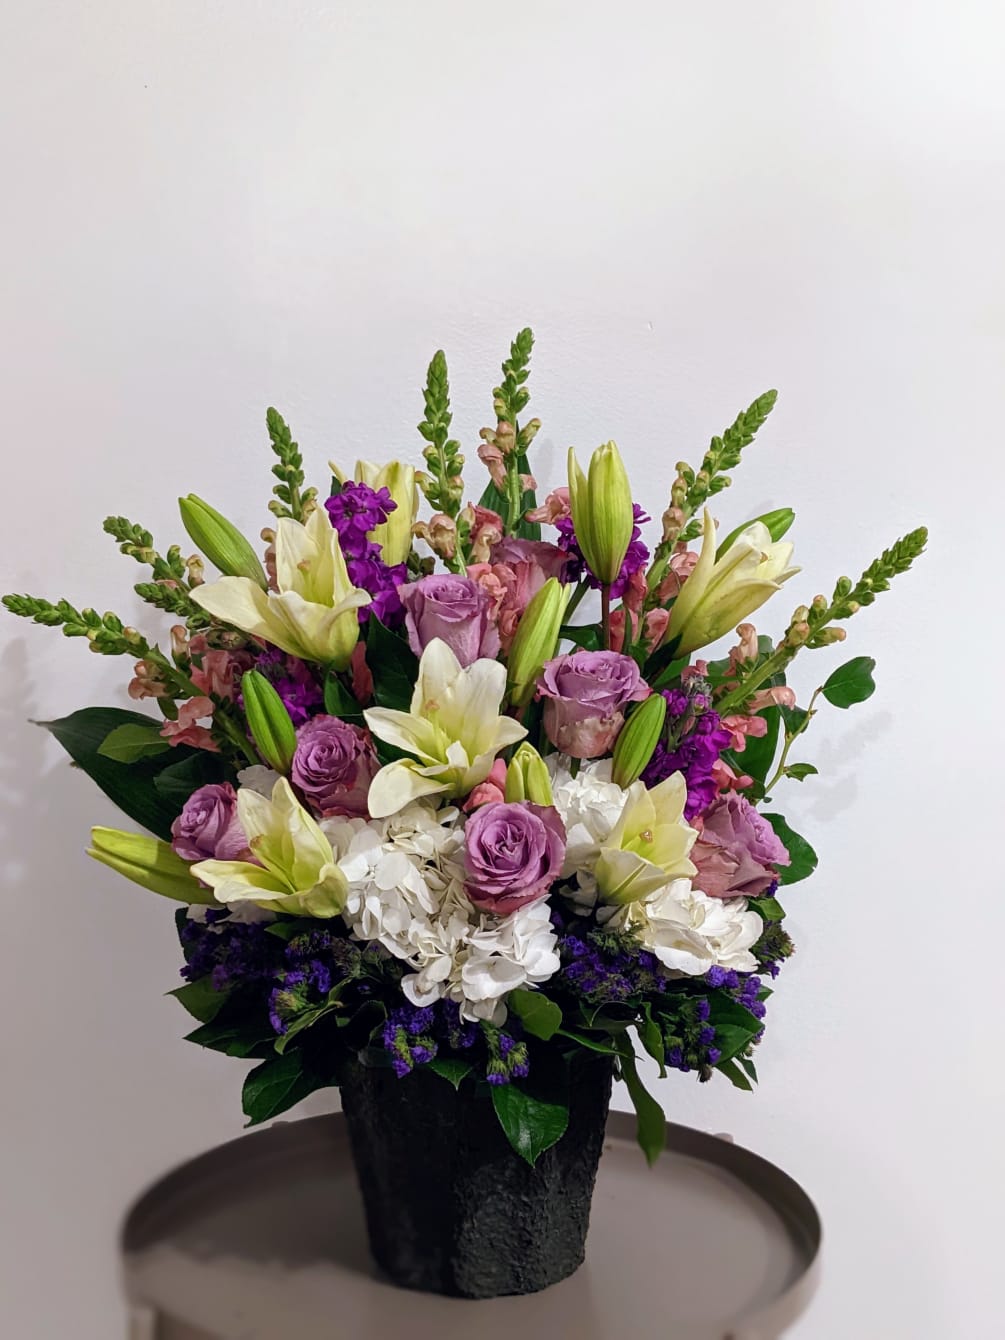 A white and lavender melody of mixed flowers in a paper mache